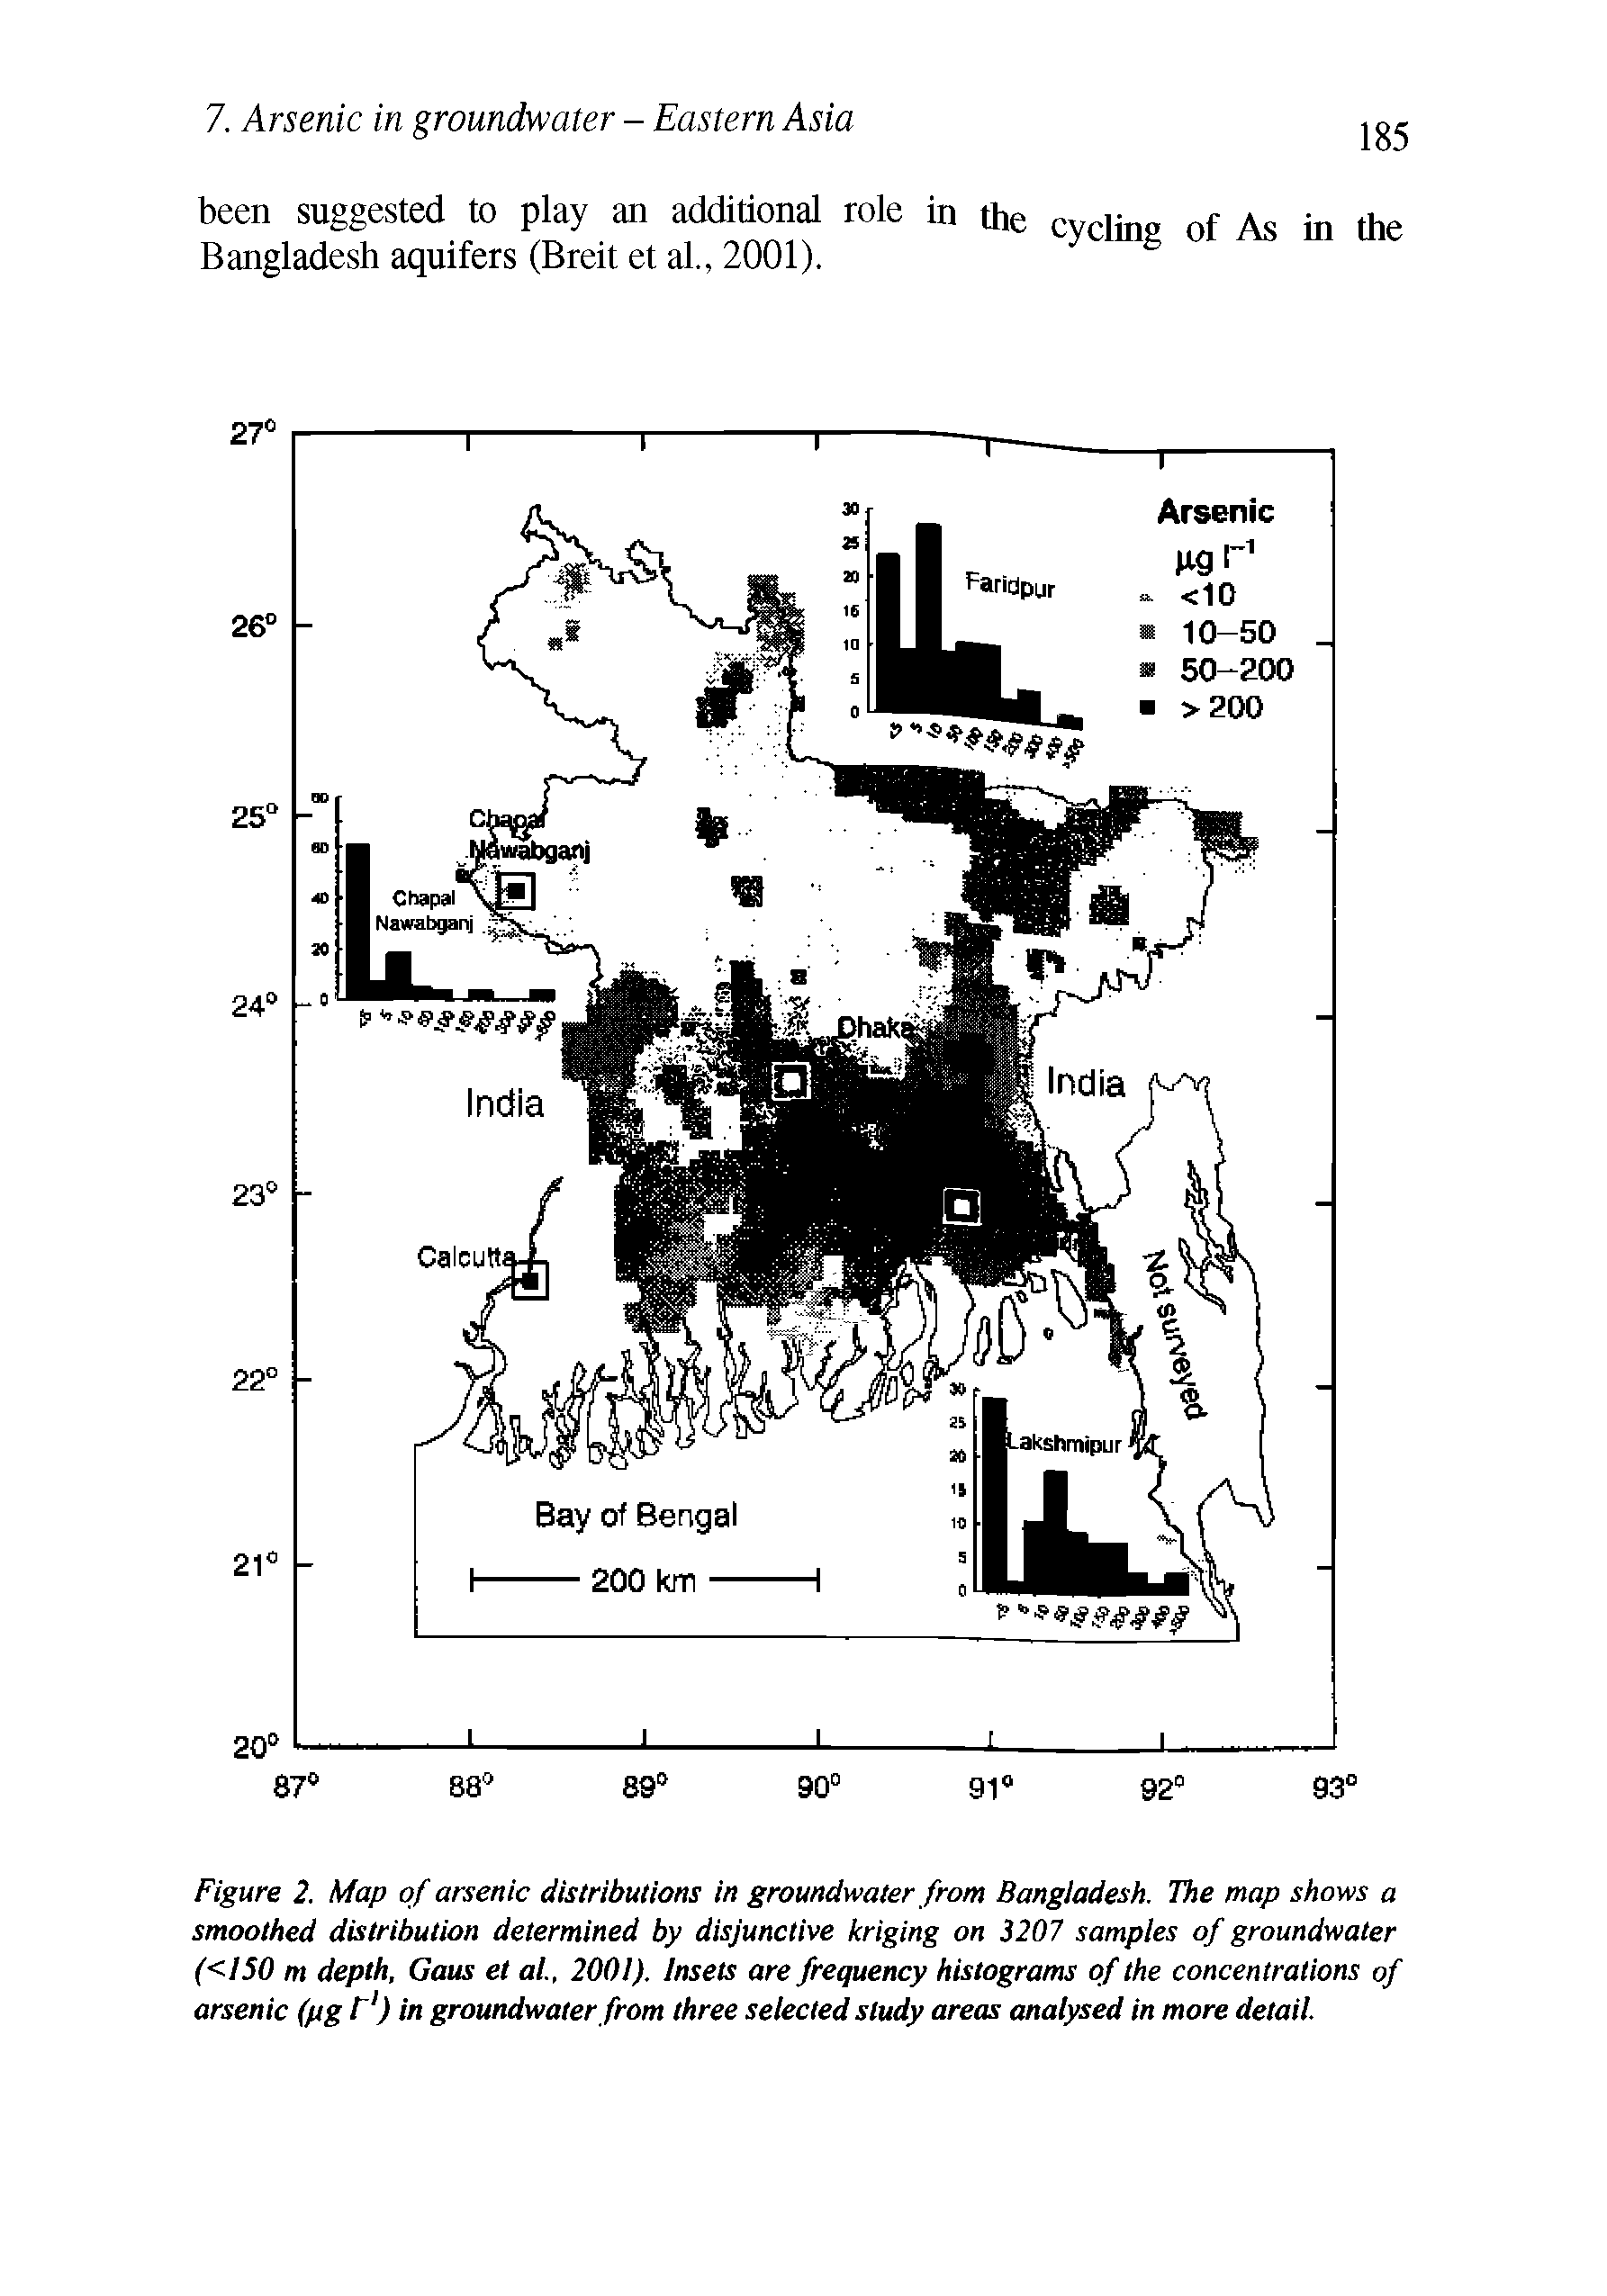 Figure 2. Map of arsenic distributions in groundwater from Bangladesh. The map shows a smoothed distribution determined by disjunctive kriging on 3207 samples of groundwater (<150 m depth, Gaus et al, 2001). Insets are frequency histograms of the concentrations of arsenic (pg F ) in groundwater from three selected study areas analysed in more detail...